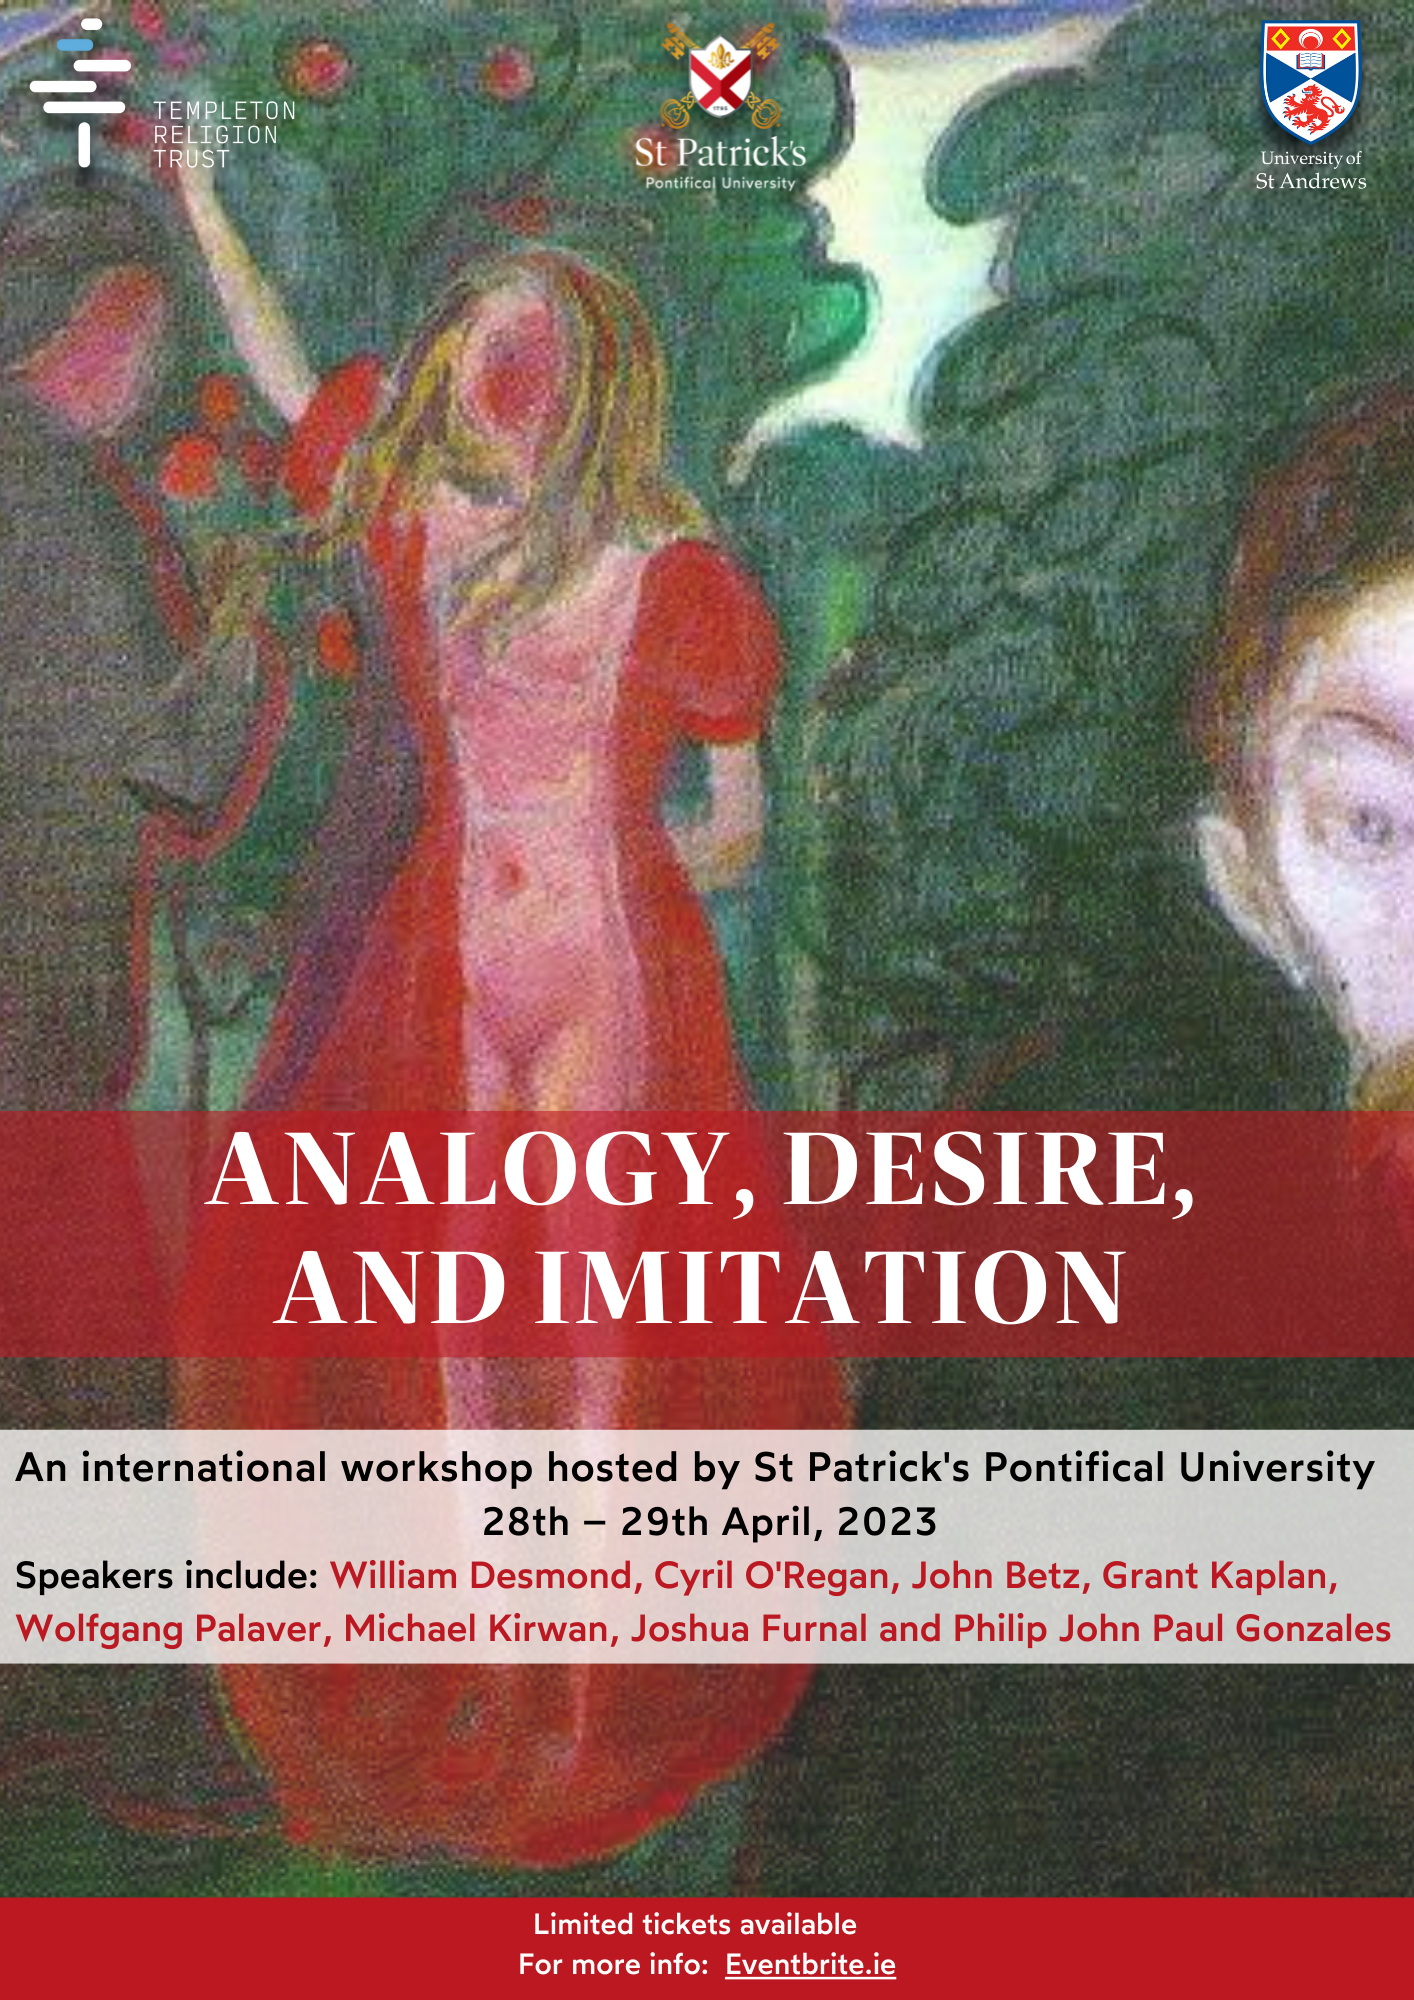 Analogy-Desire-and-Imitation-Workshop-Poster.png#asset:13802